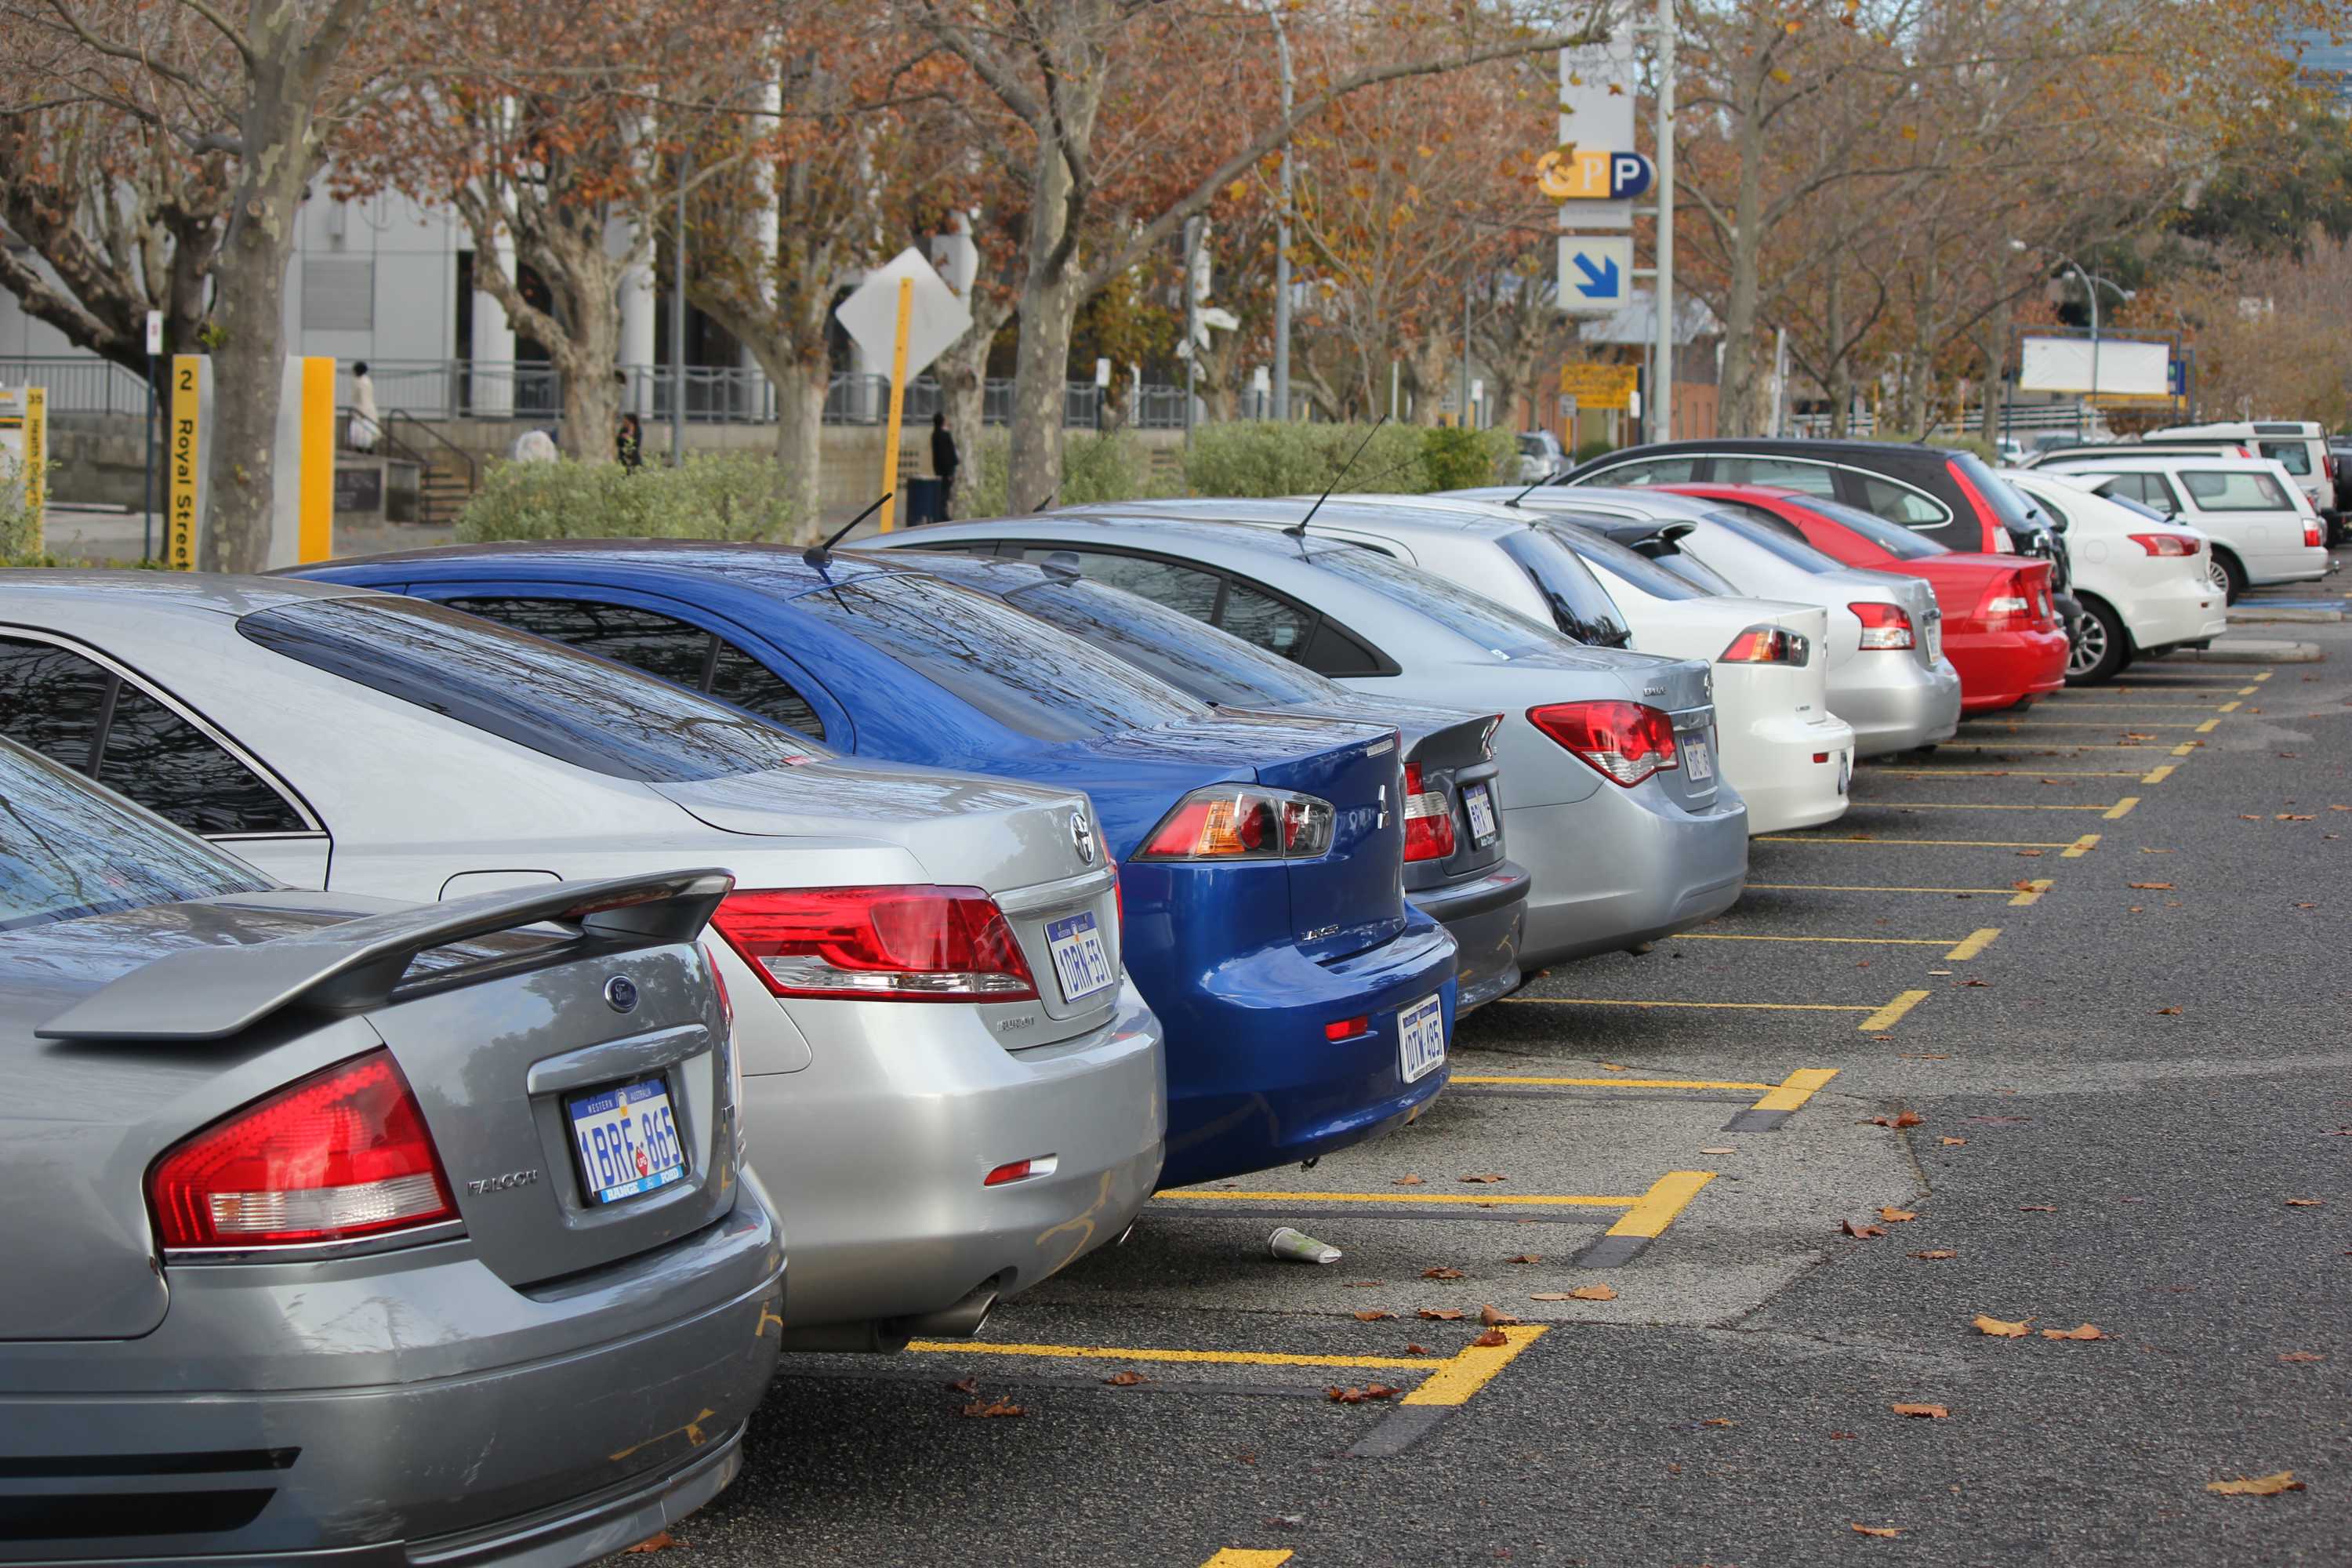 Future of parking: Should we ditch car parks to free up land in